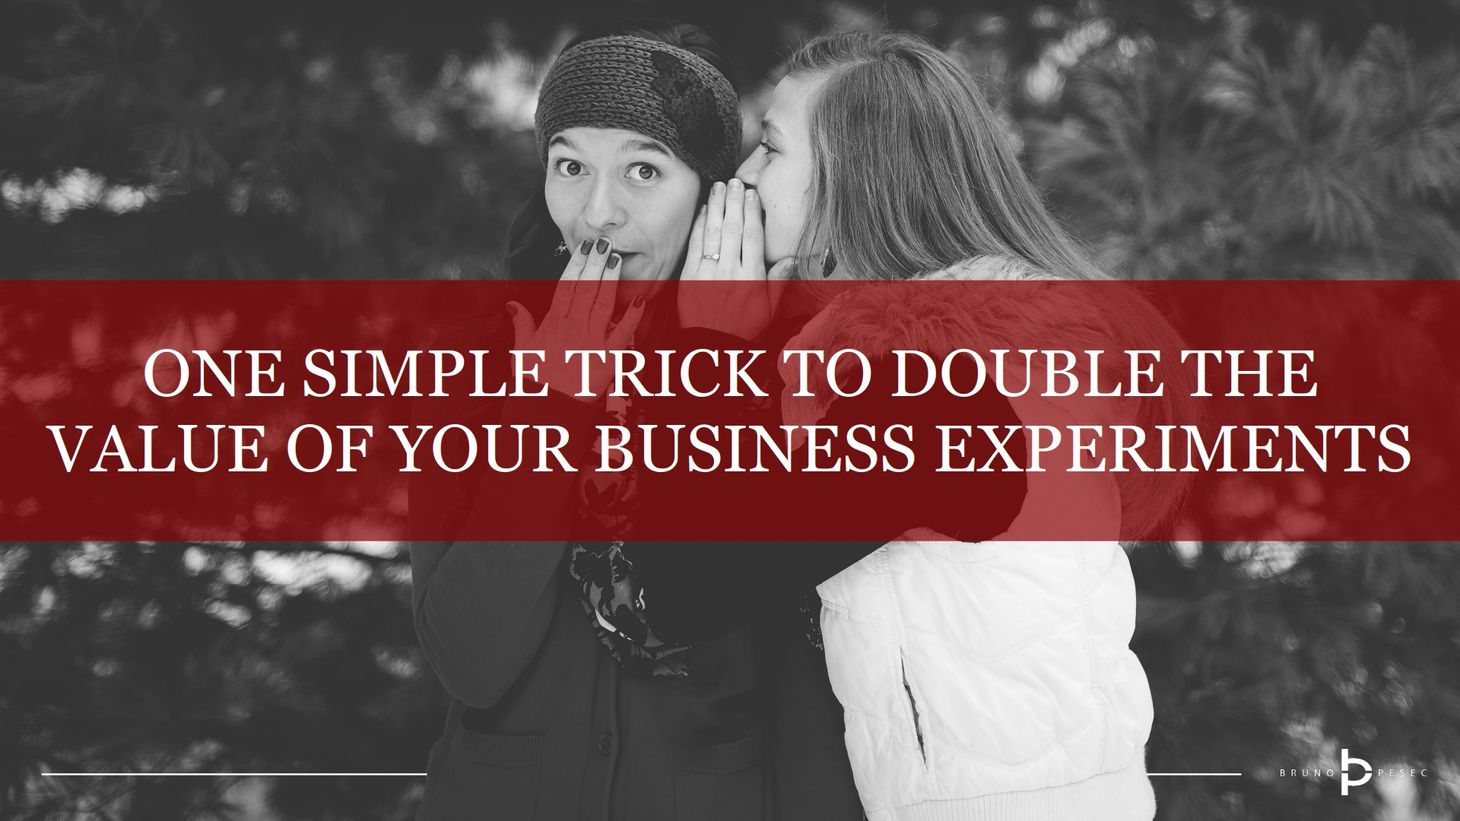 One simple trick to double the value of your business experiments